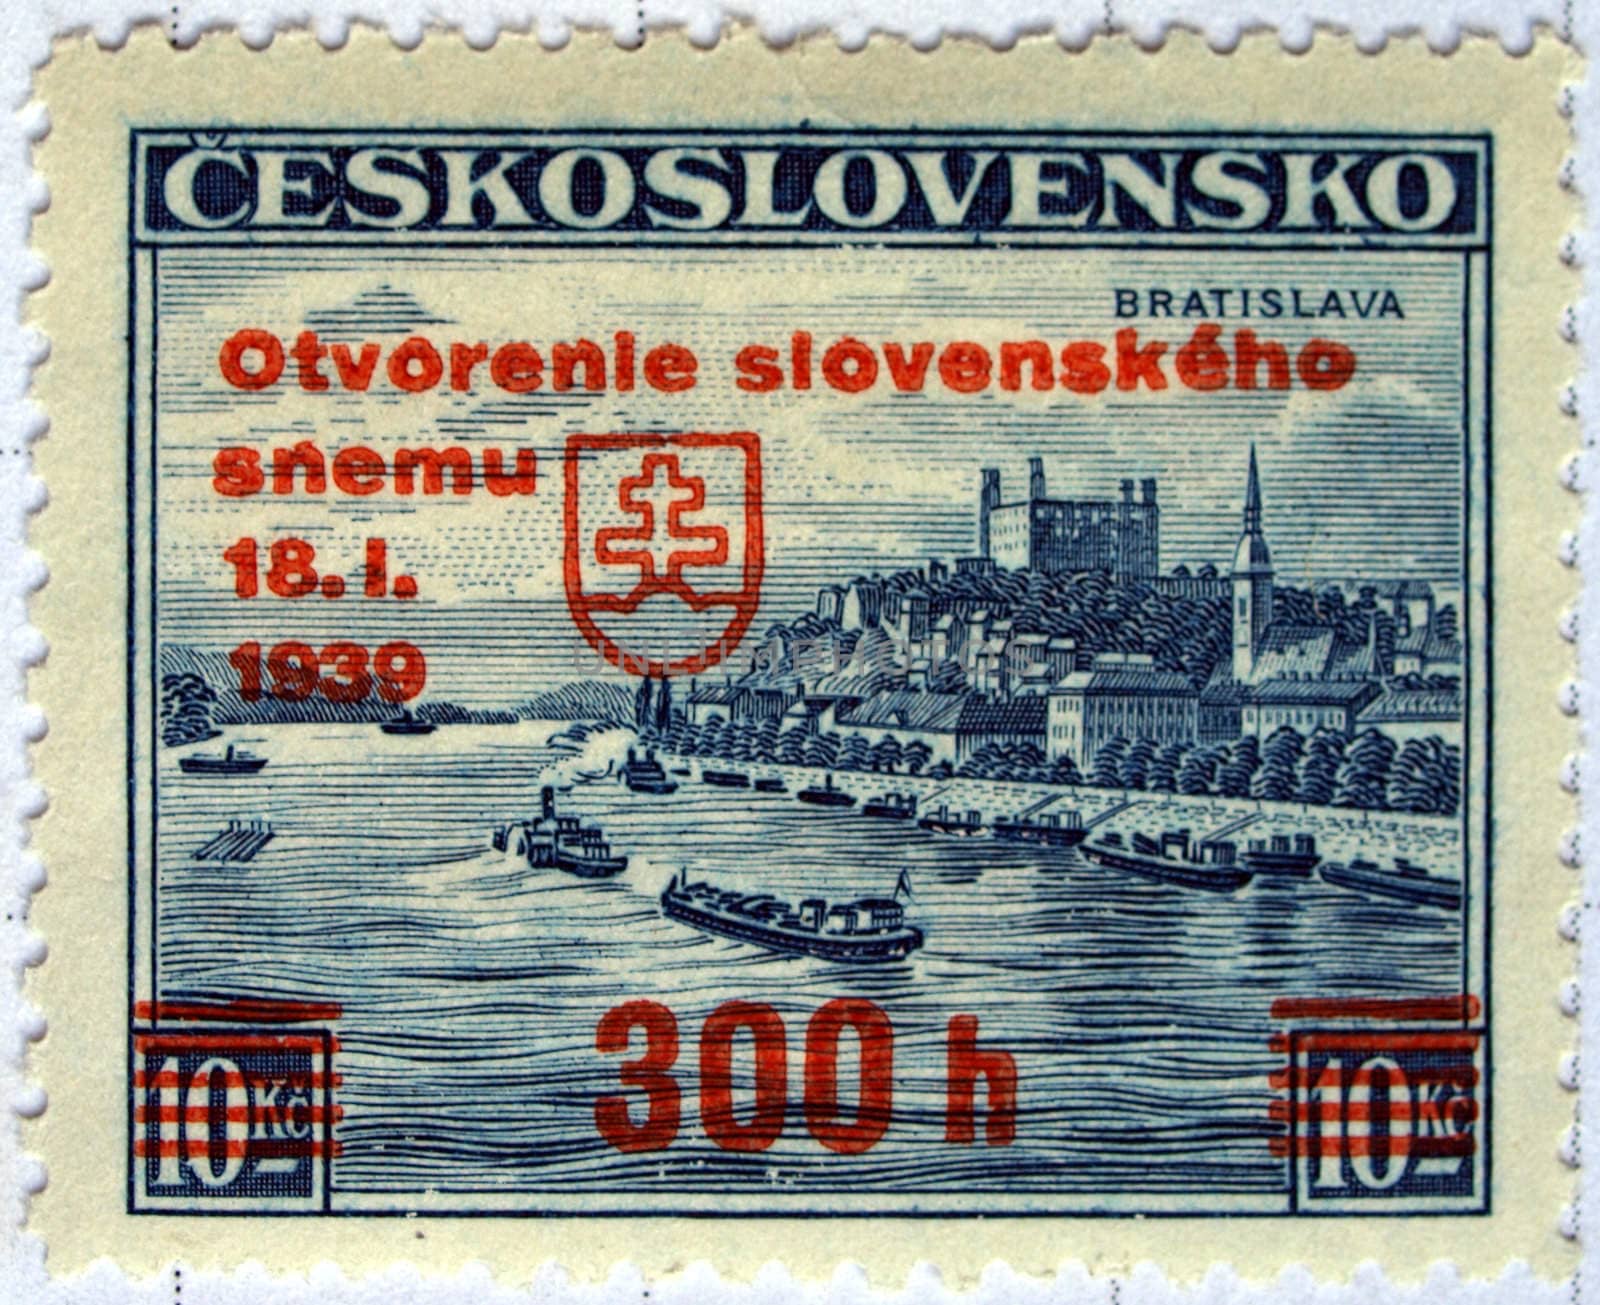 Czech stamps by paolo77